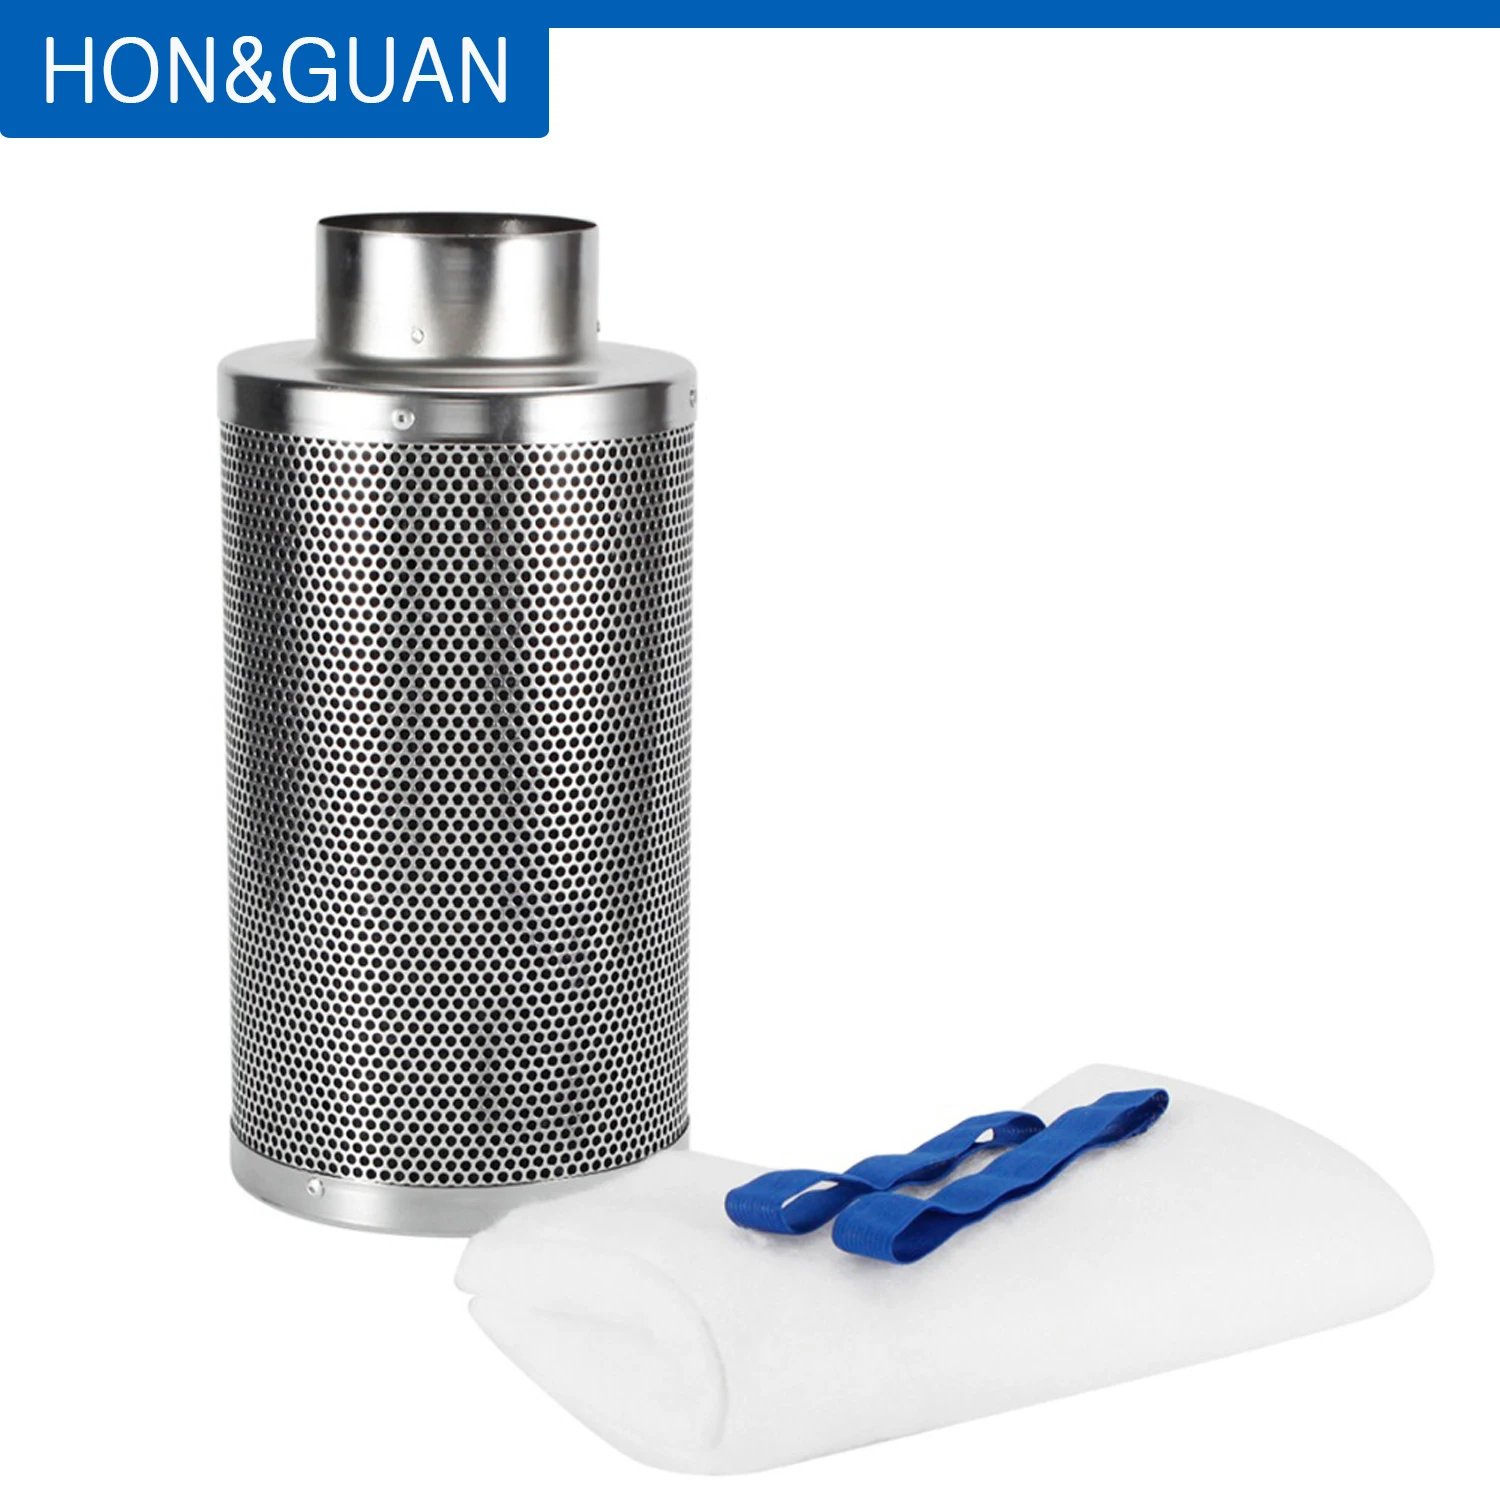 Hon&Guan 4 6 inch Filter for Inline Duct Fan Grow Tent Kit with Australia Virgin Charcoal Activated Ventilation Fan Air Scrubber